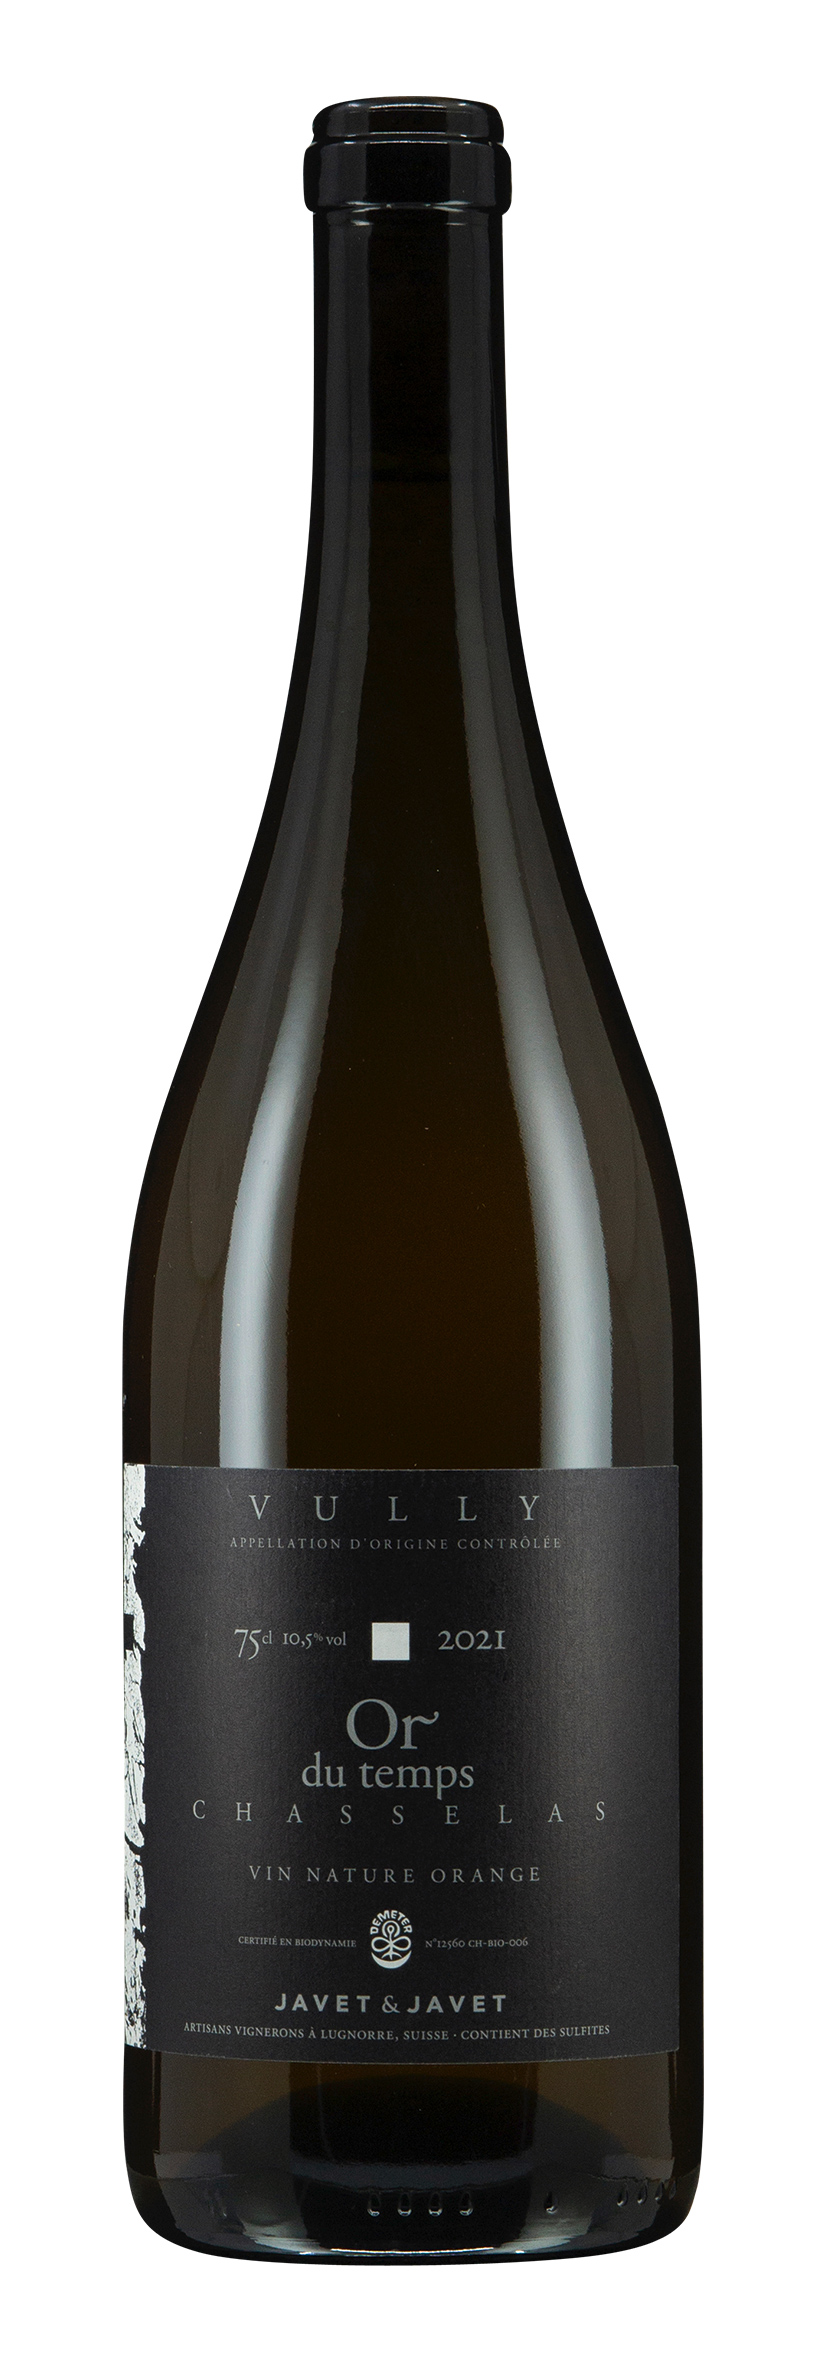 Vully AOC - Fribourg Chasselas Or du temps 2021